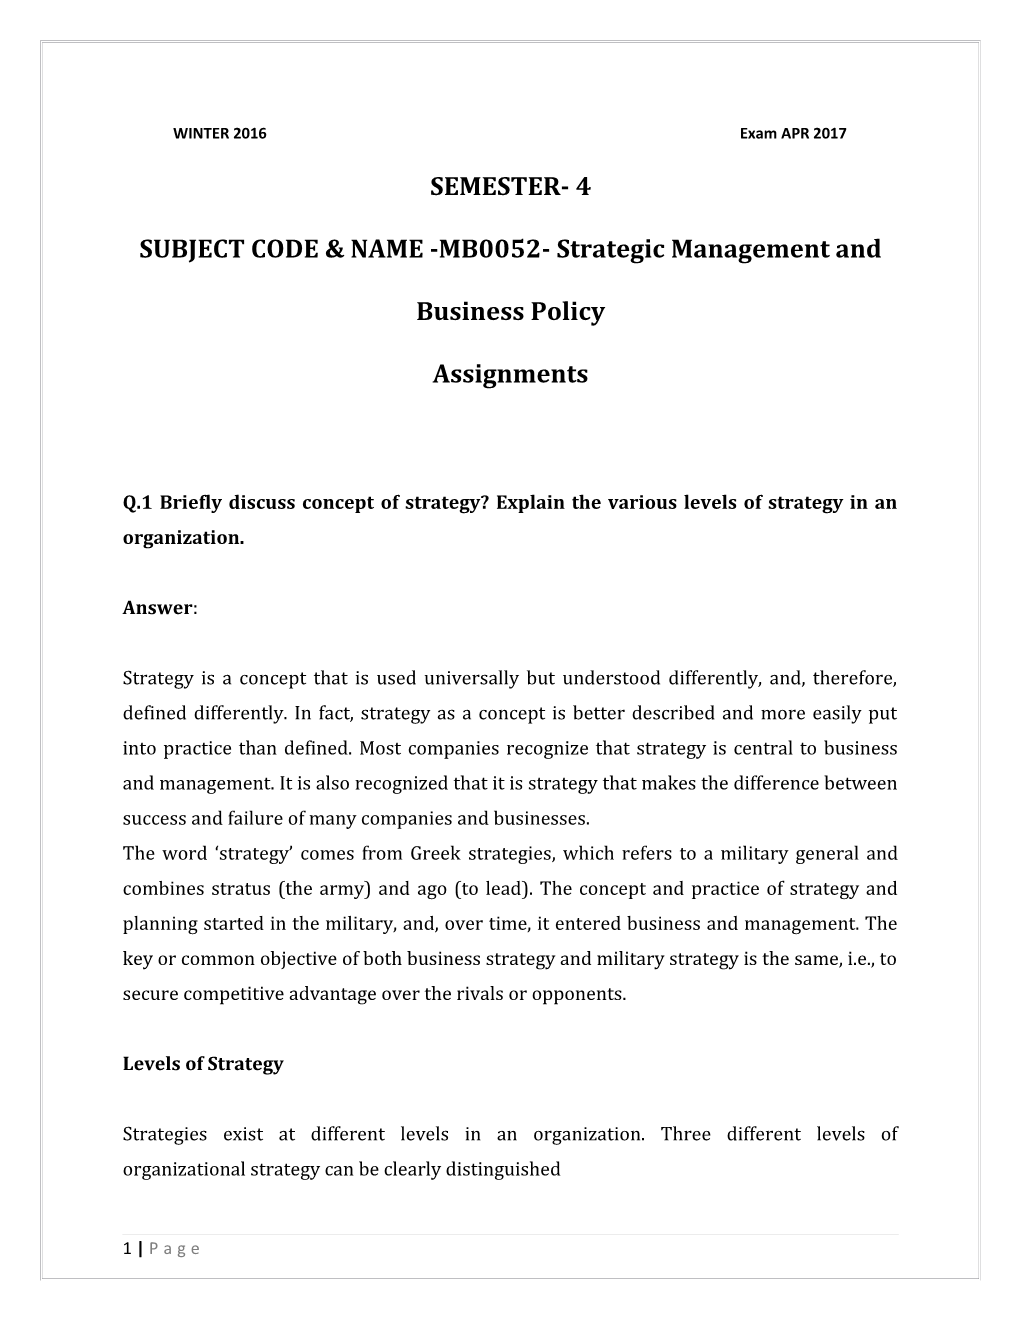 SUBJECT CODE & NAME -MB0052- Strategic Management and Business Policy